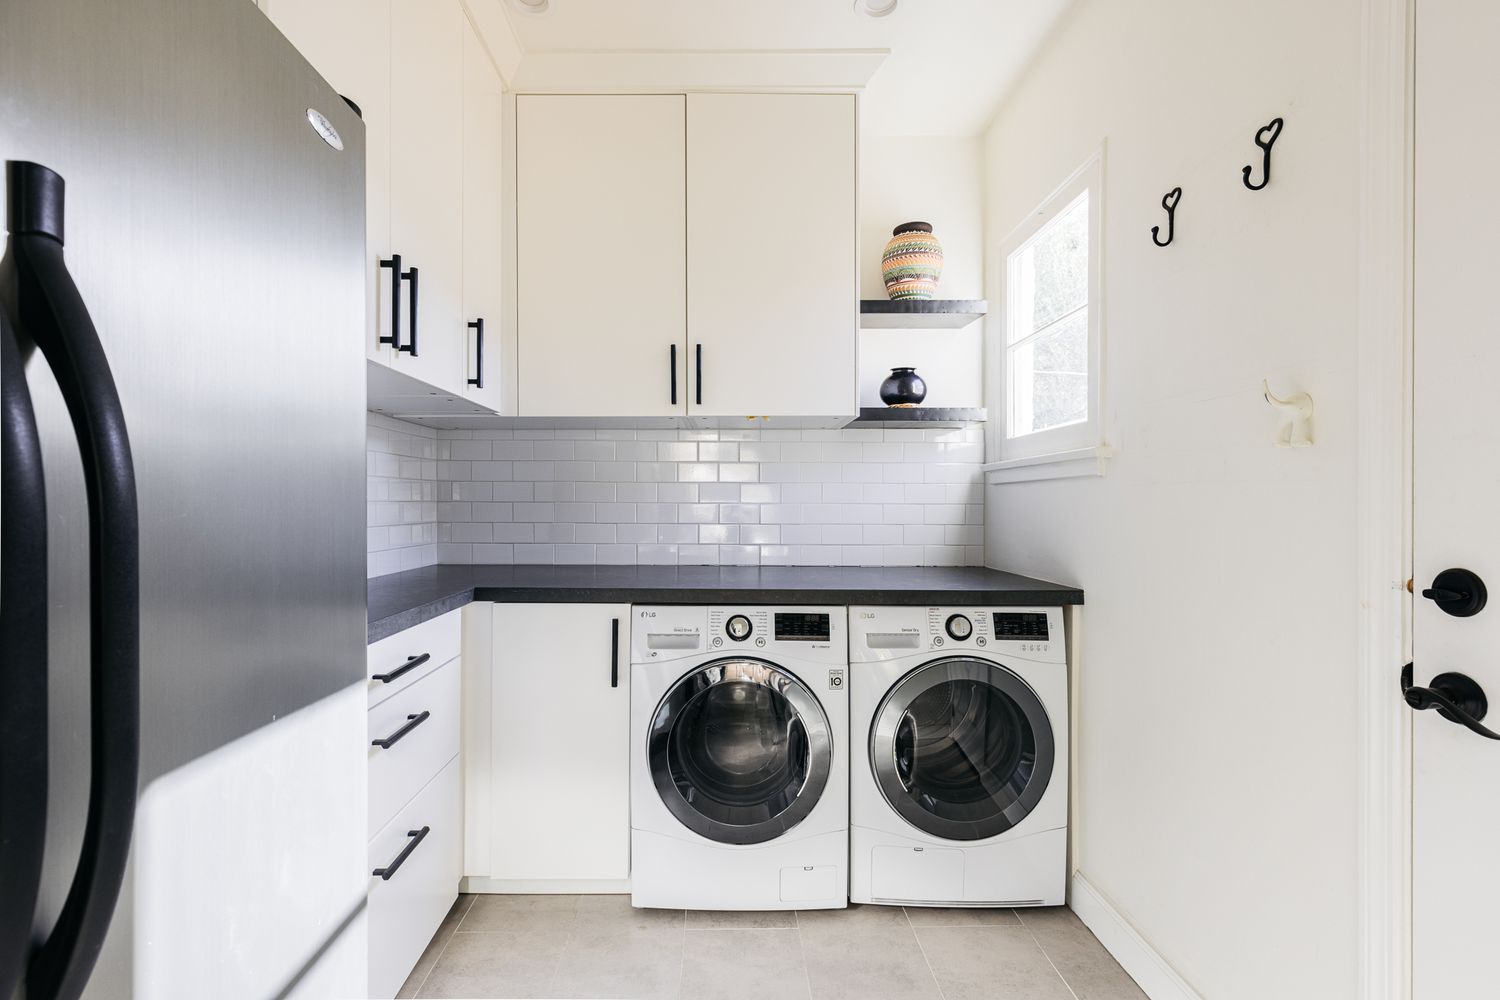 Laundry Wallpaper Ideas to Freshen Up Your Space